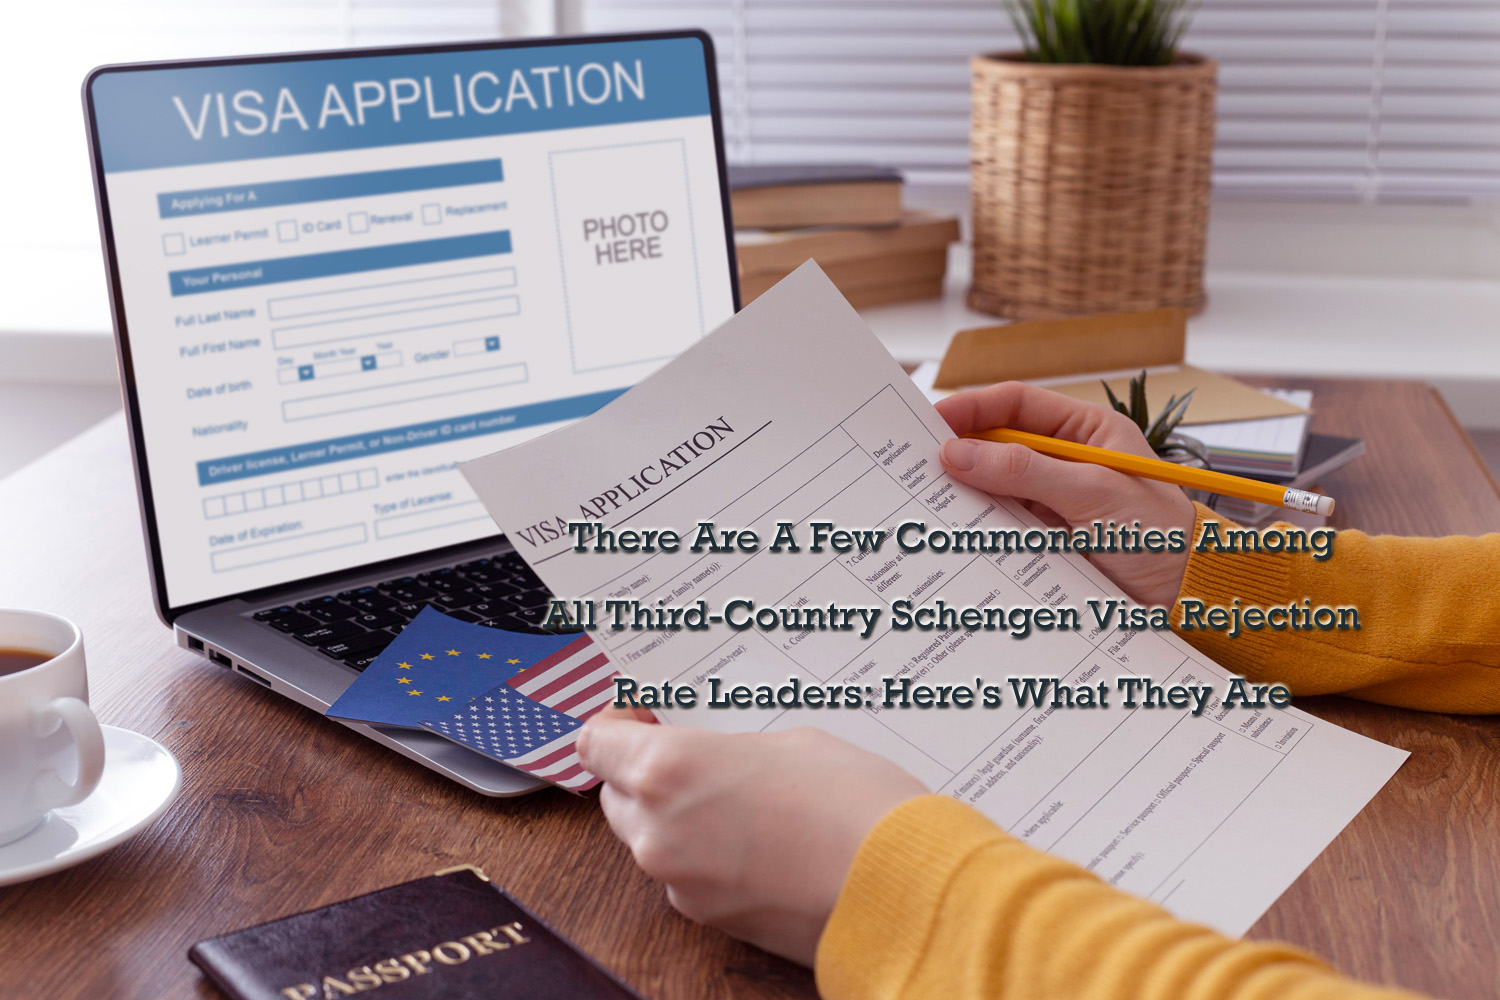 There Are A Few Commonalities Among All Third-Country Schengen Visa Rejection Rate Leaders: Here's What They Are